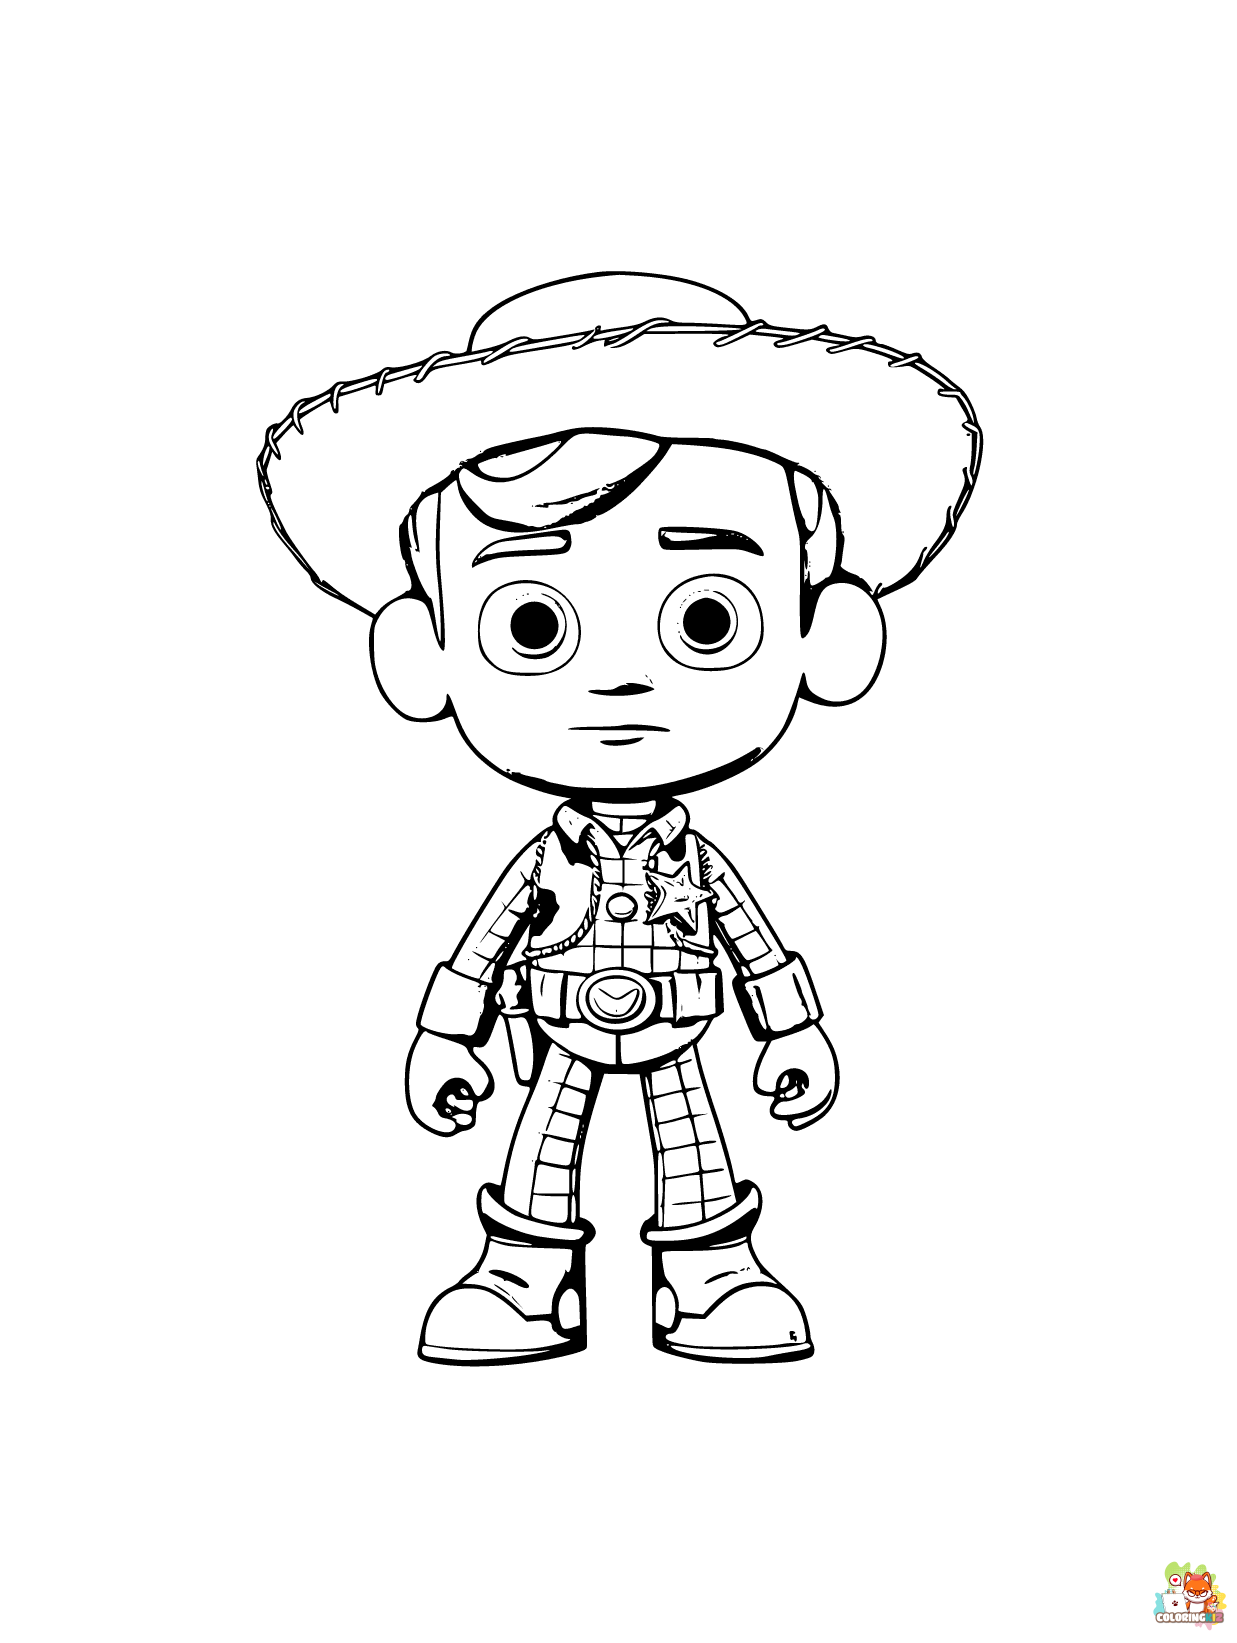 Toy Story coloring pages to print